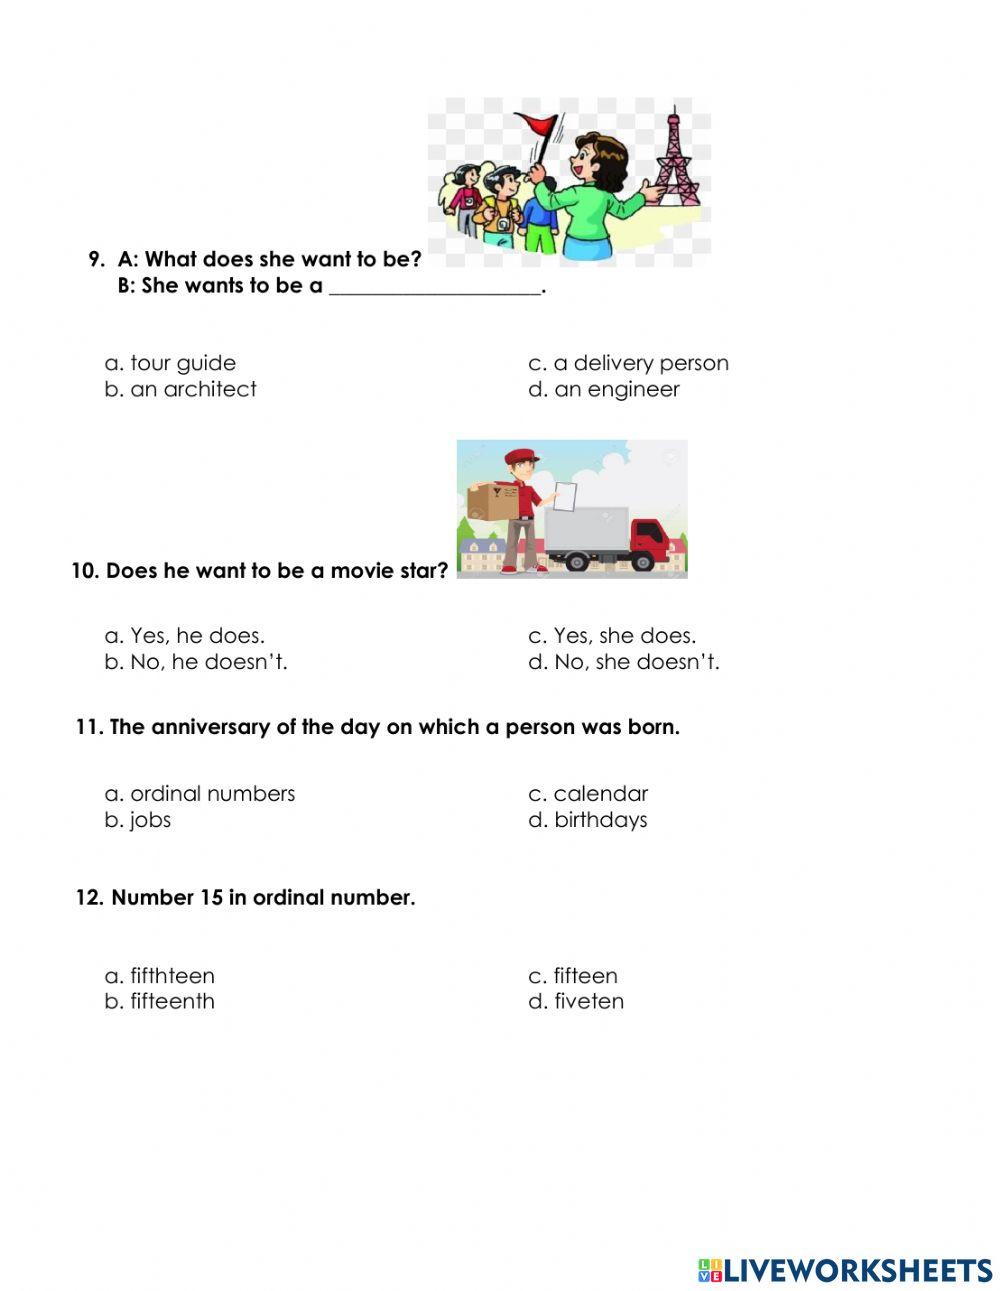 P4 english final test for term 1